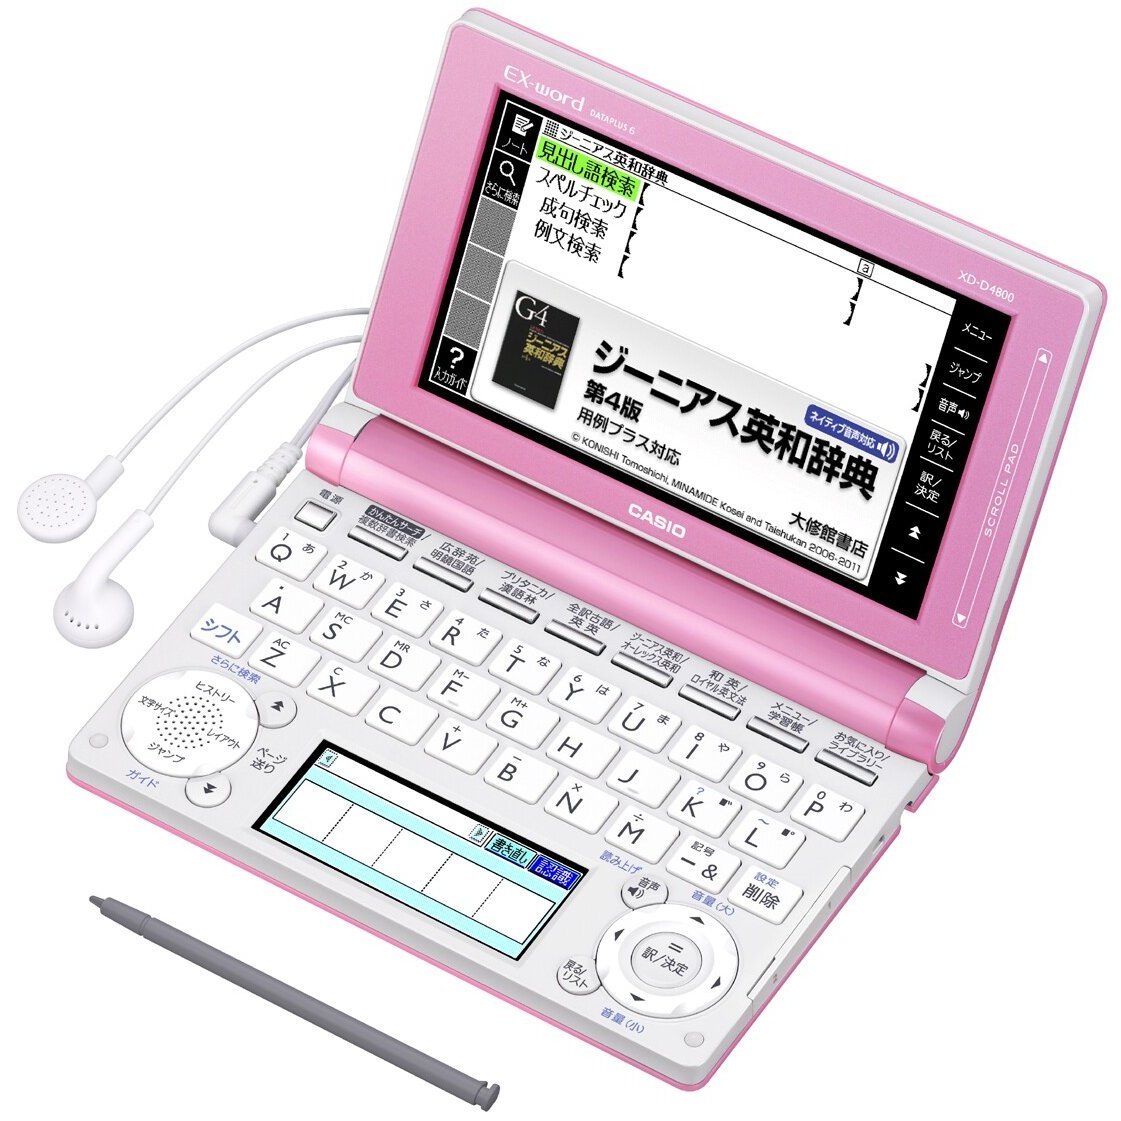 CASIO EX-word XD-D4800PK Japanese English Electronic Dictionary